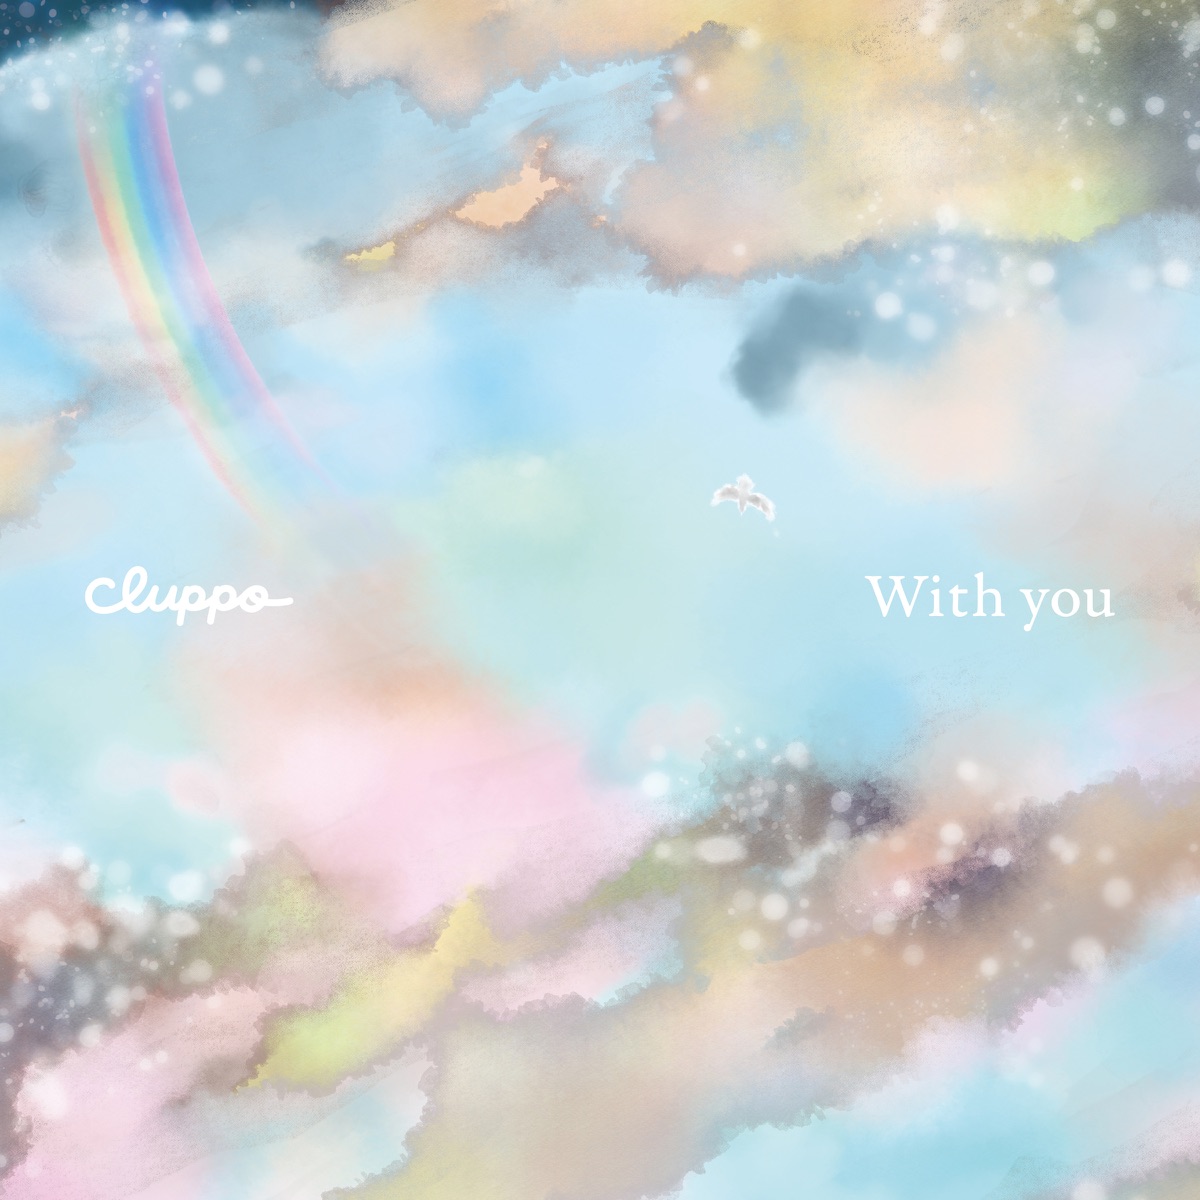 『cluppo - With you』収録の『With you』ジャケット